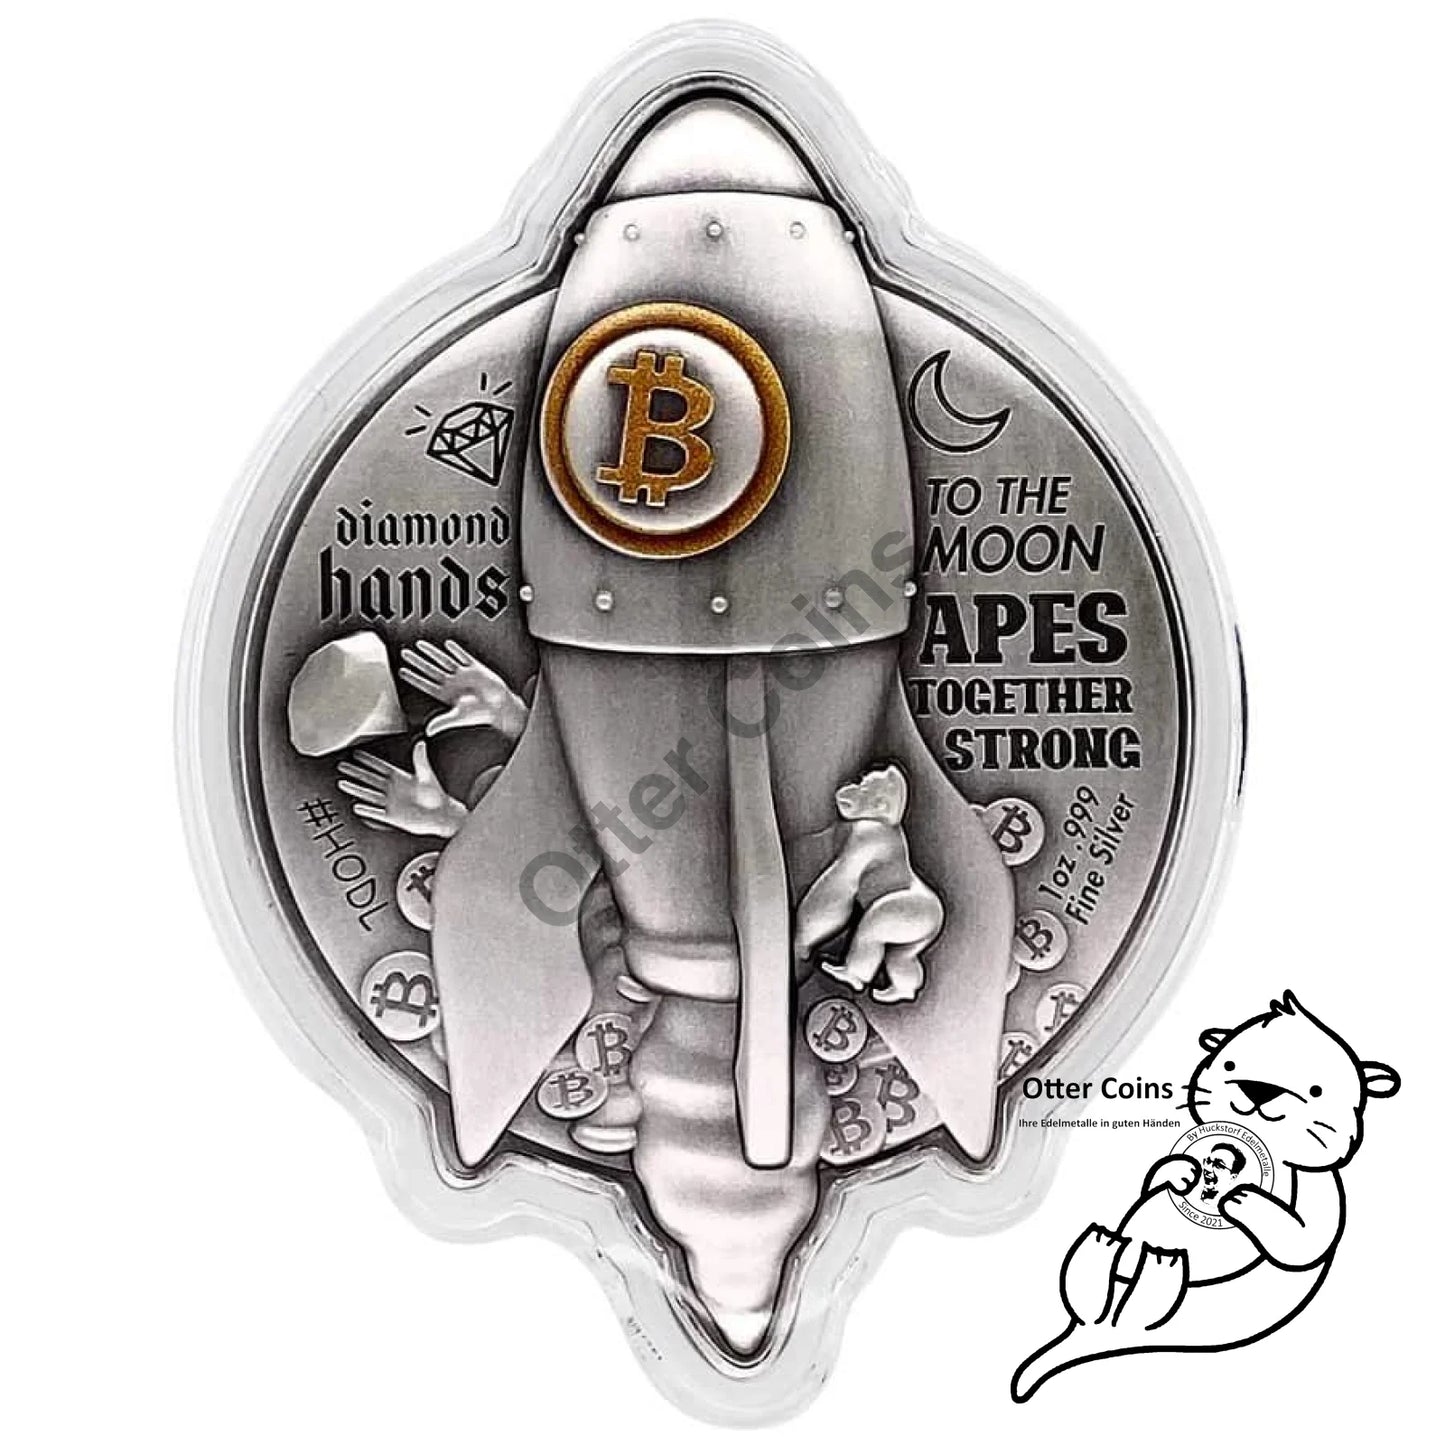 2022 Chad 1 oz Bitcoin Rocket Shaped Antiqued High Relief